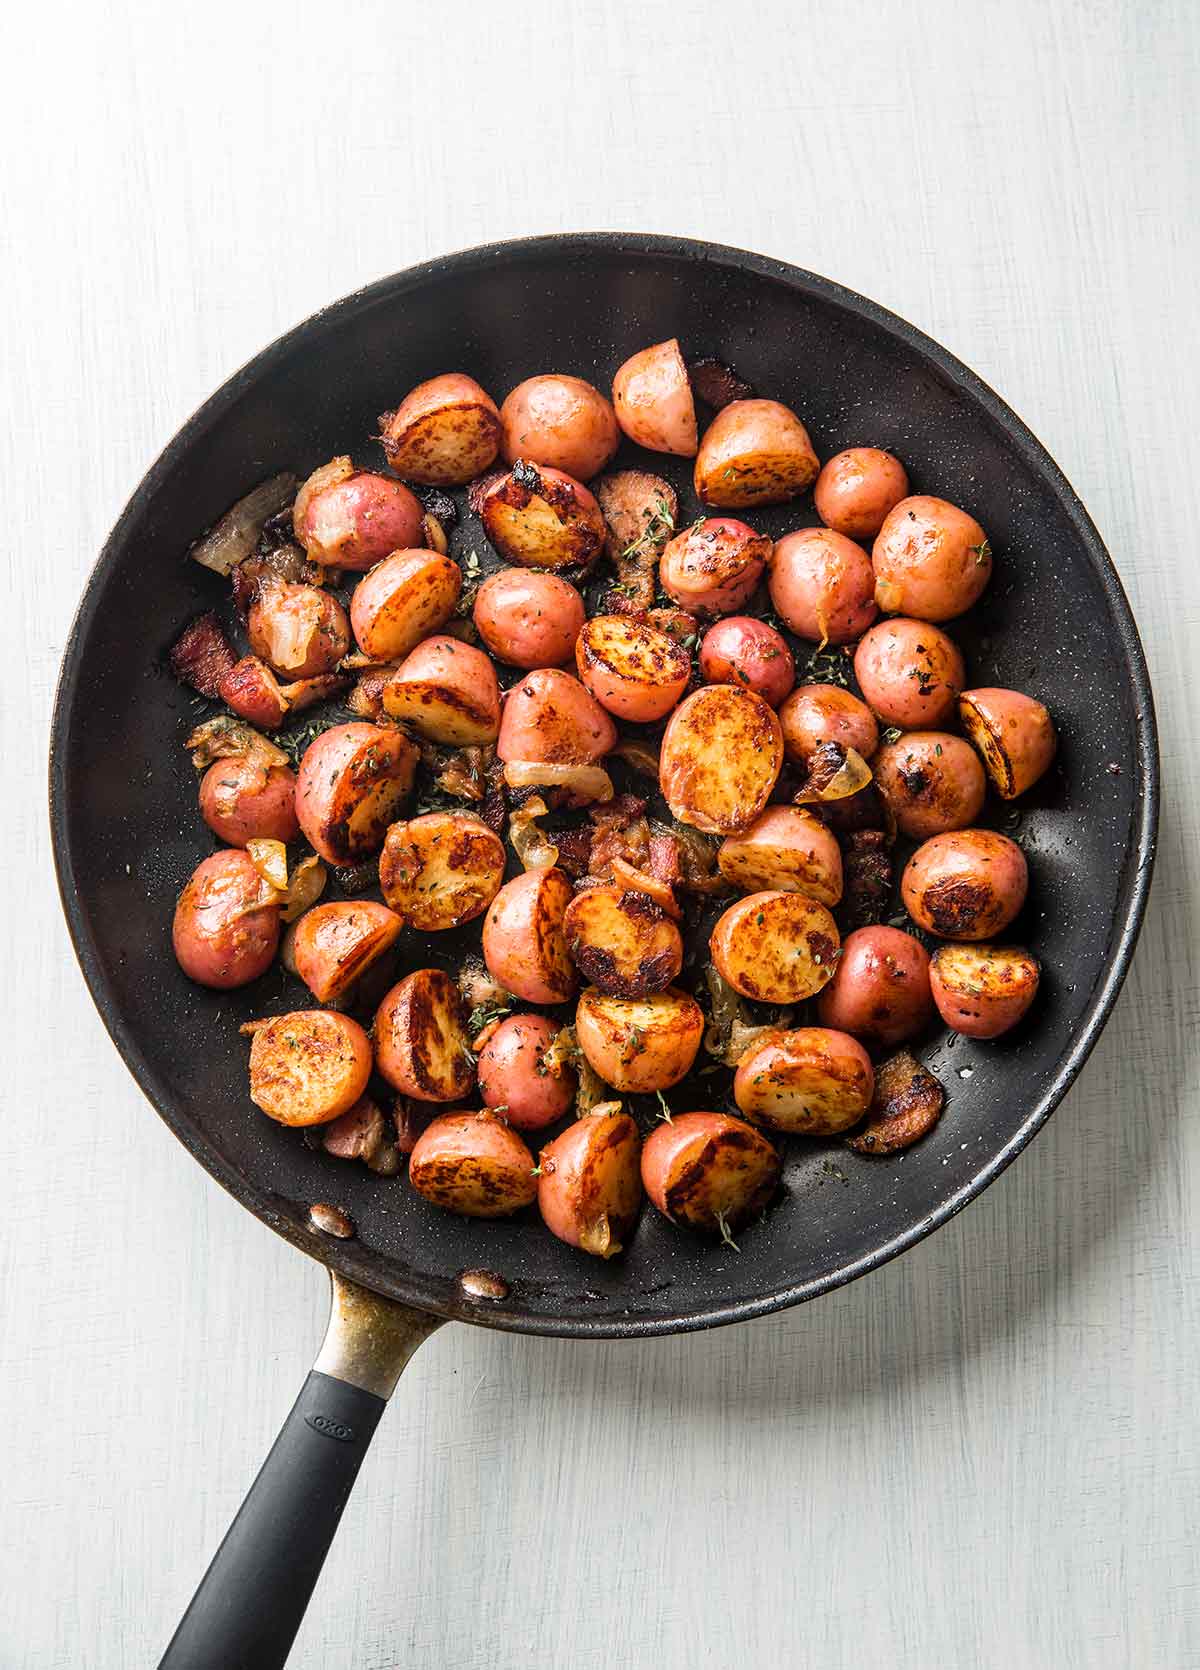 A frying pan filled with halved red potatoes that are browned and covered with crispy bacon and thyme.